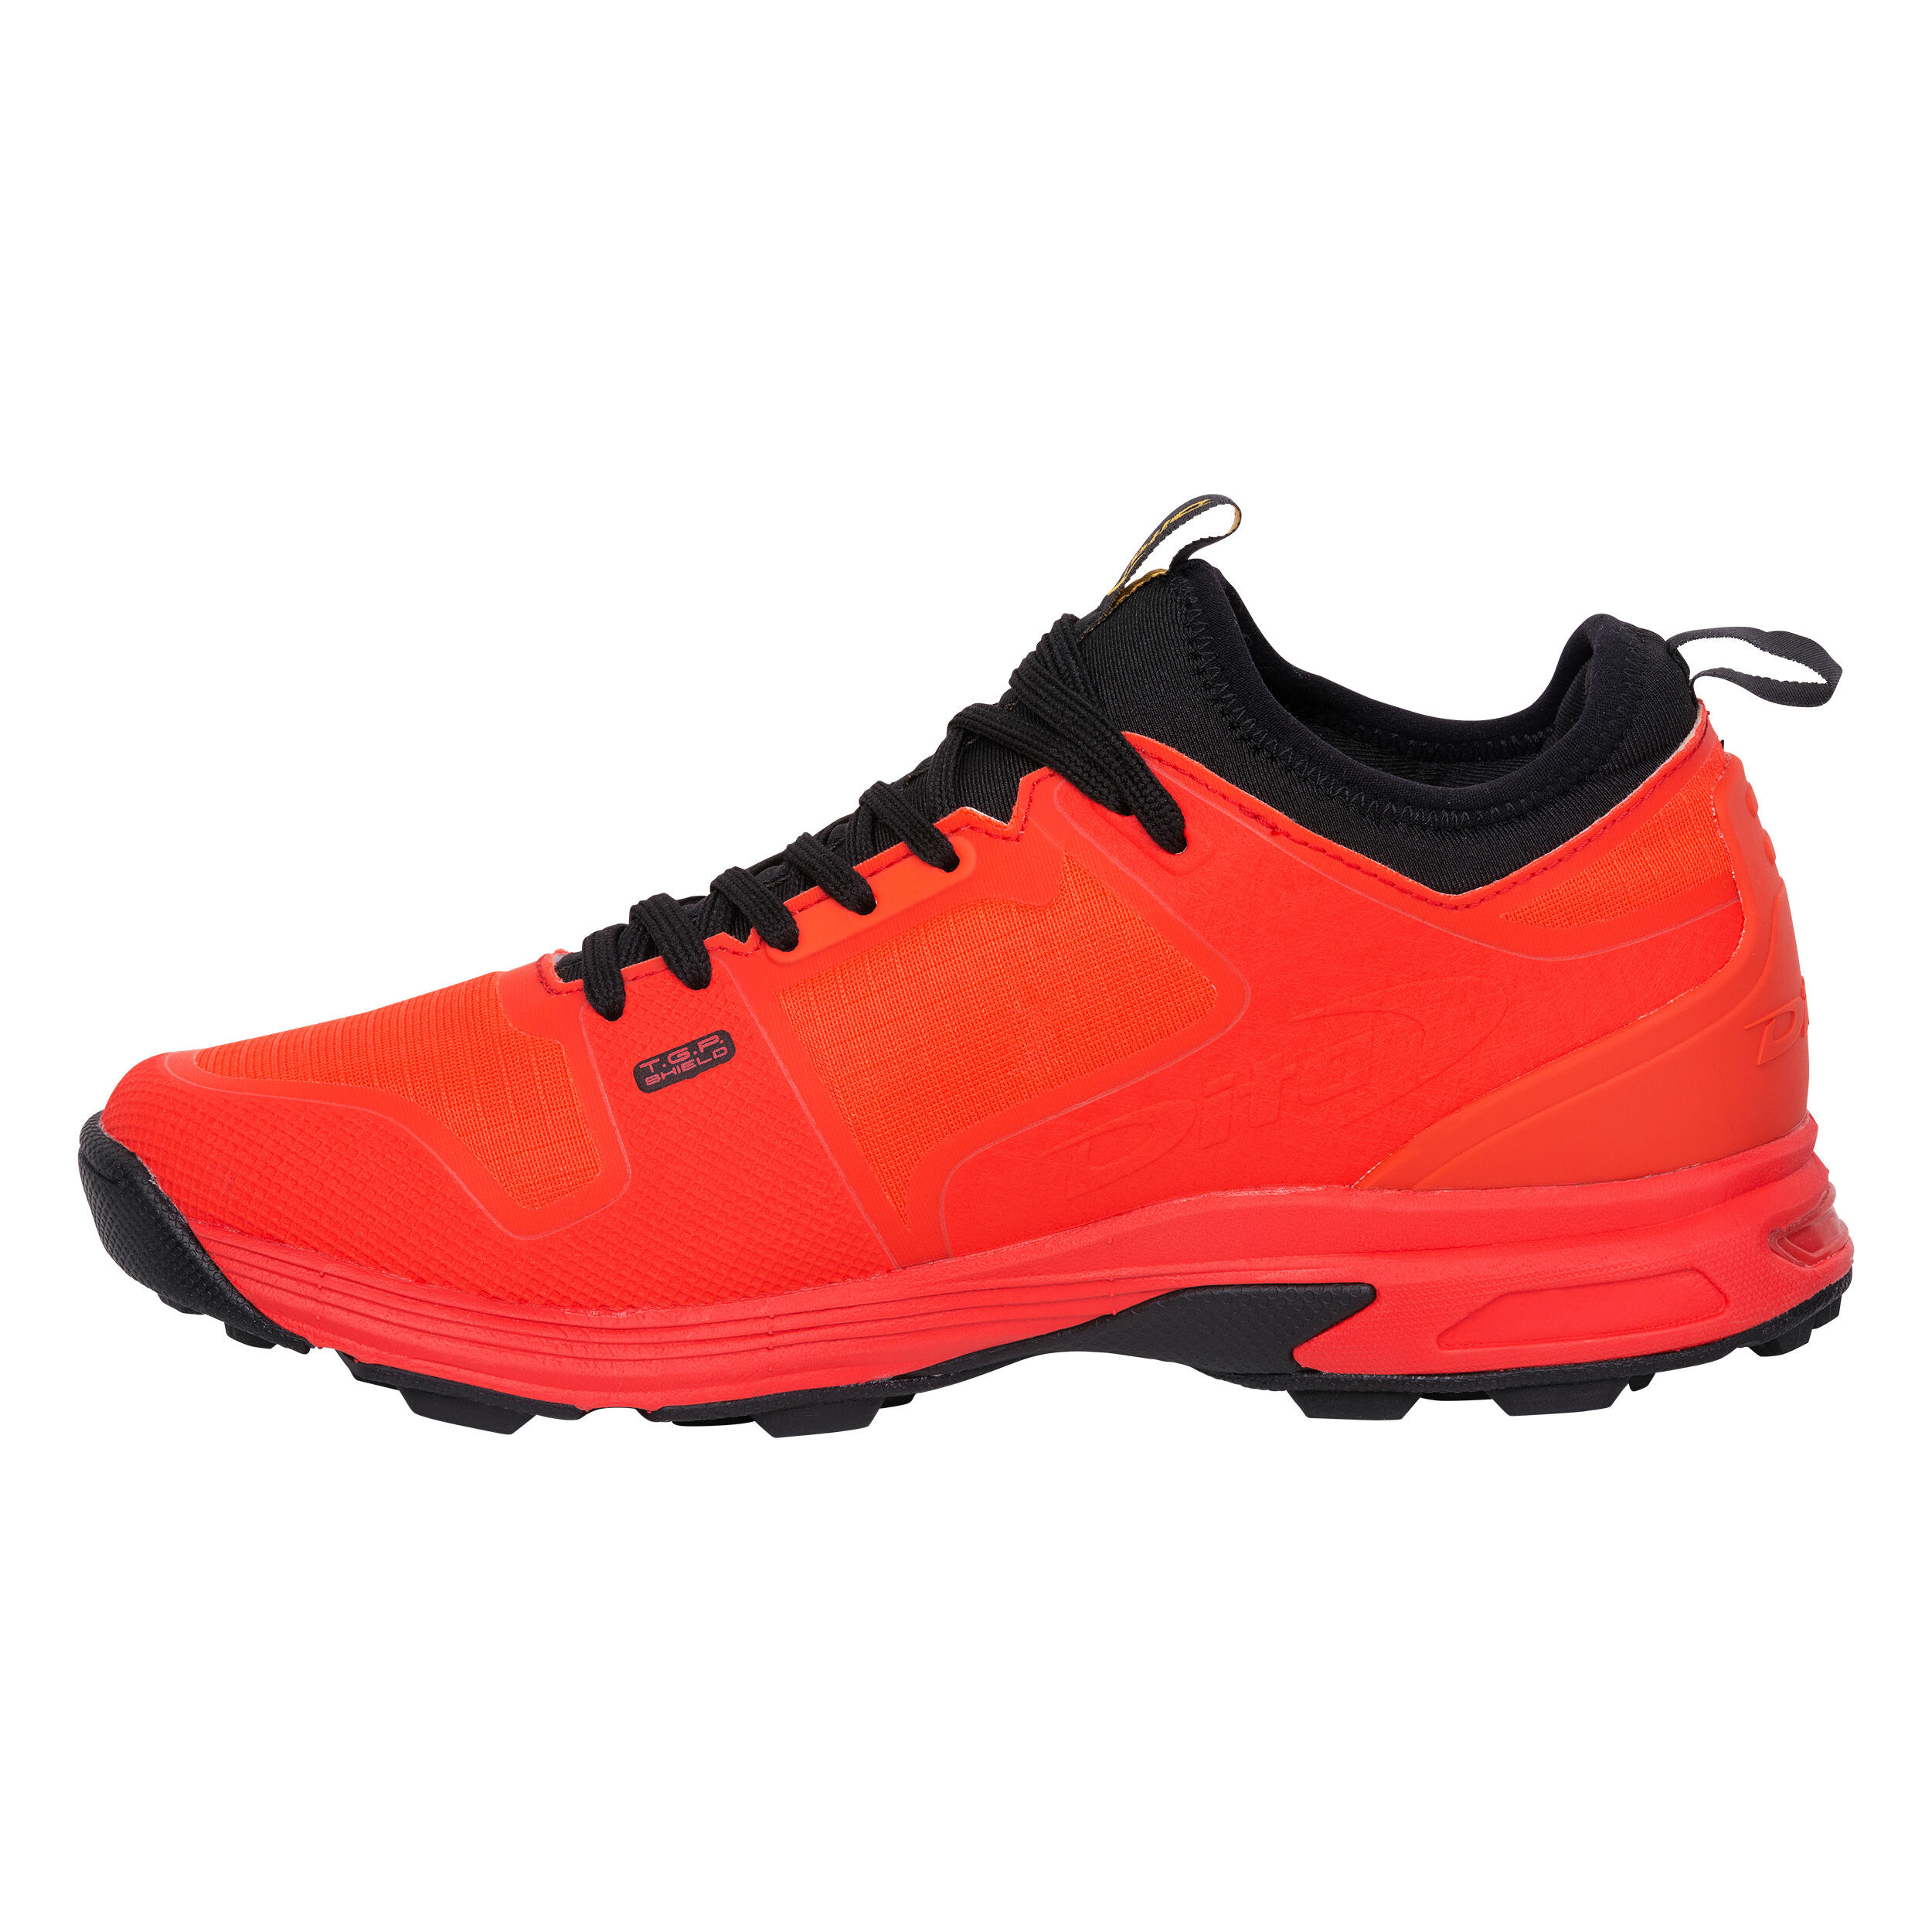 Adult High-Intensity Field Hockey Shoes LGHT 750 - Red 3/7